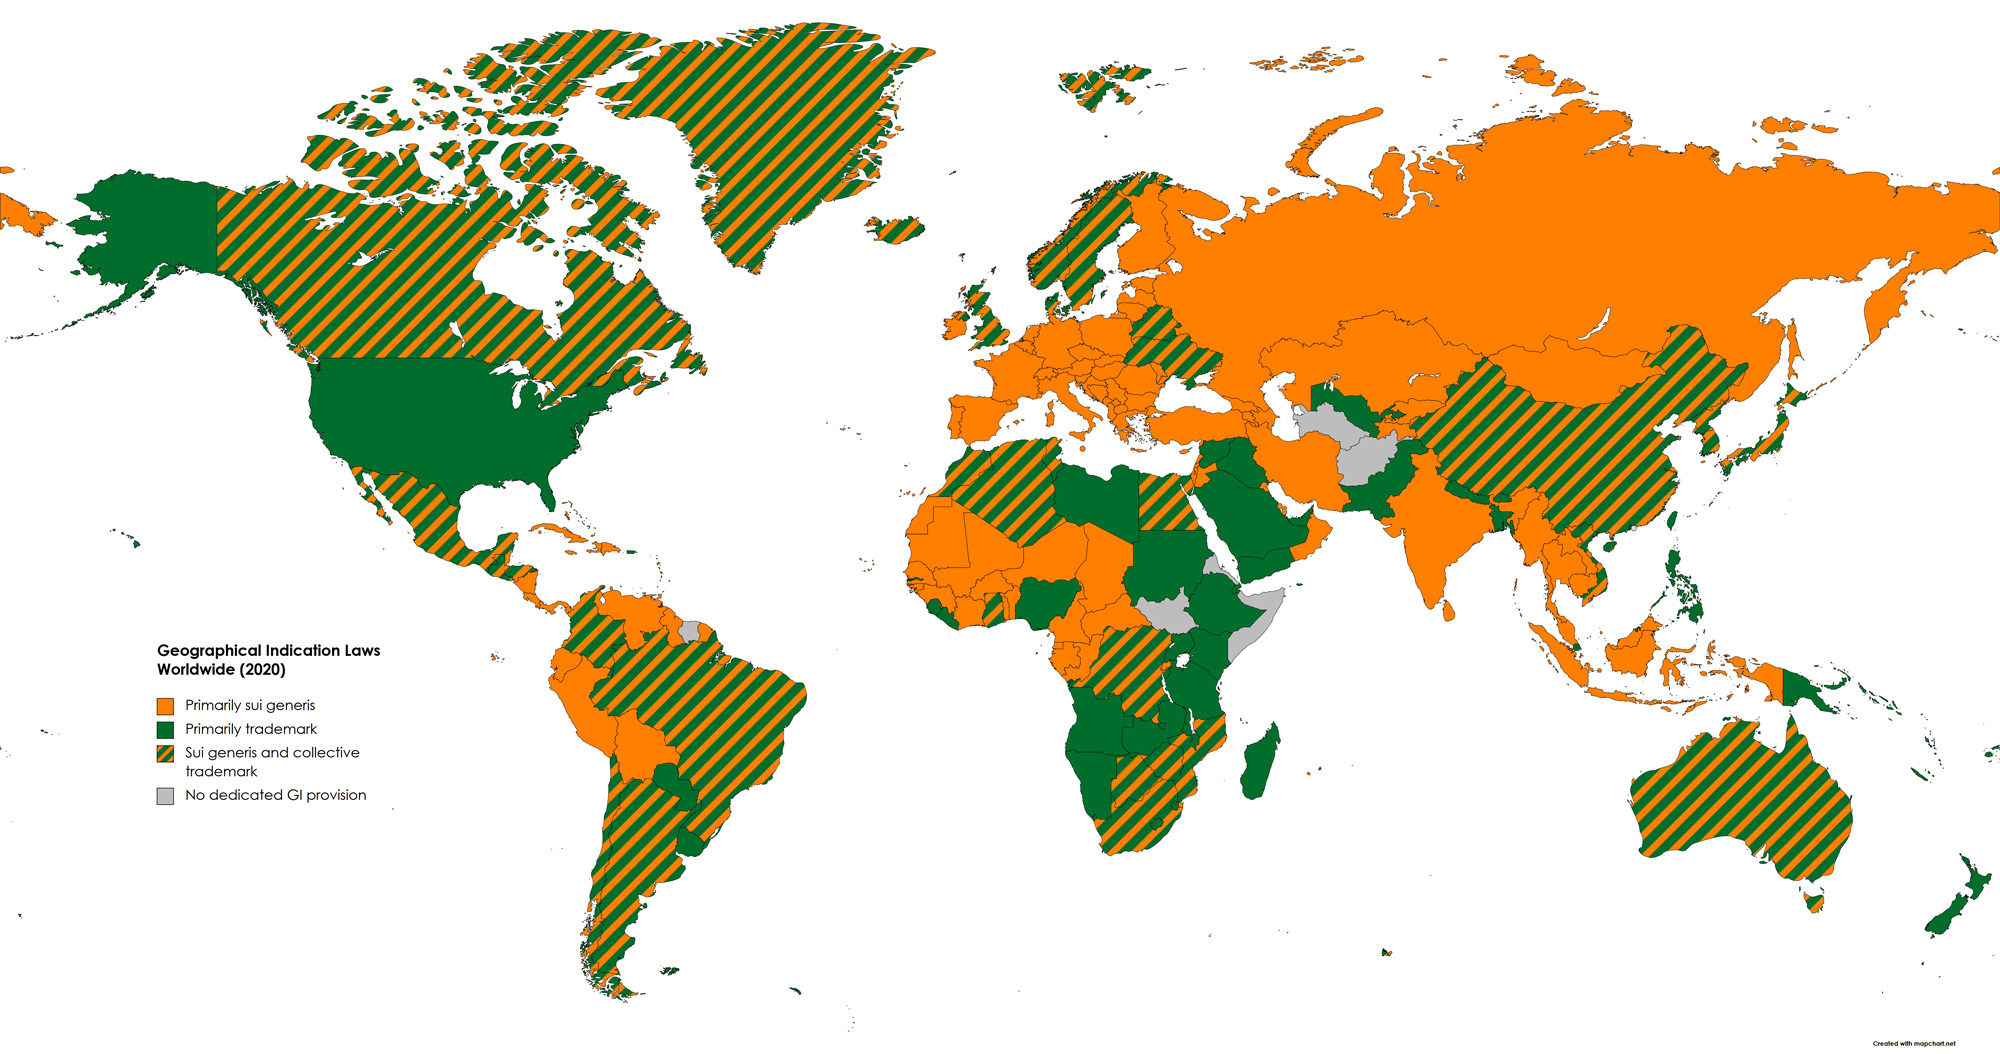 Map_GI_Laws_World_2020_Feuer